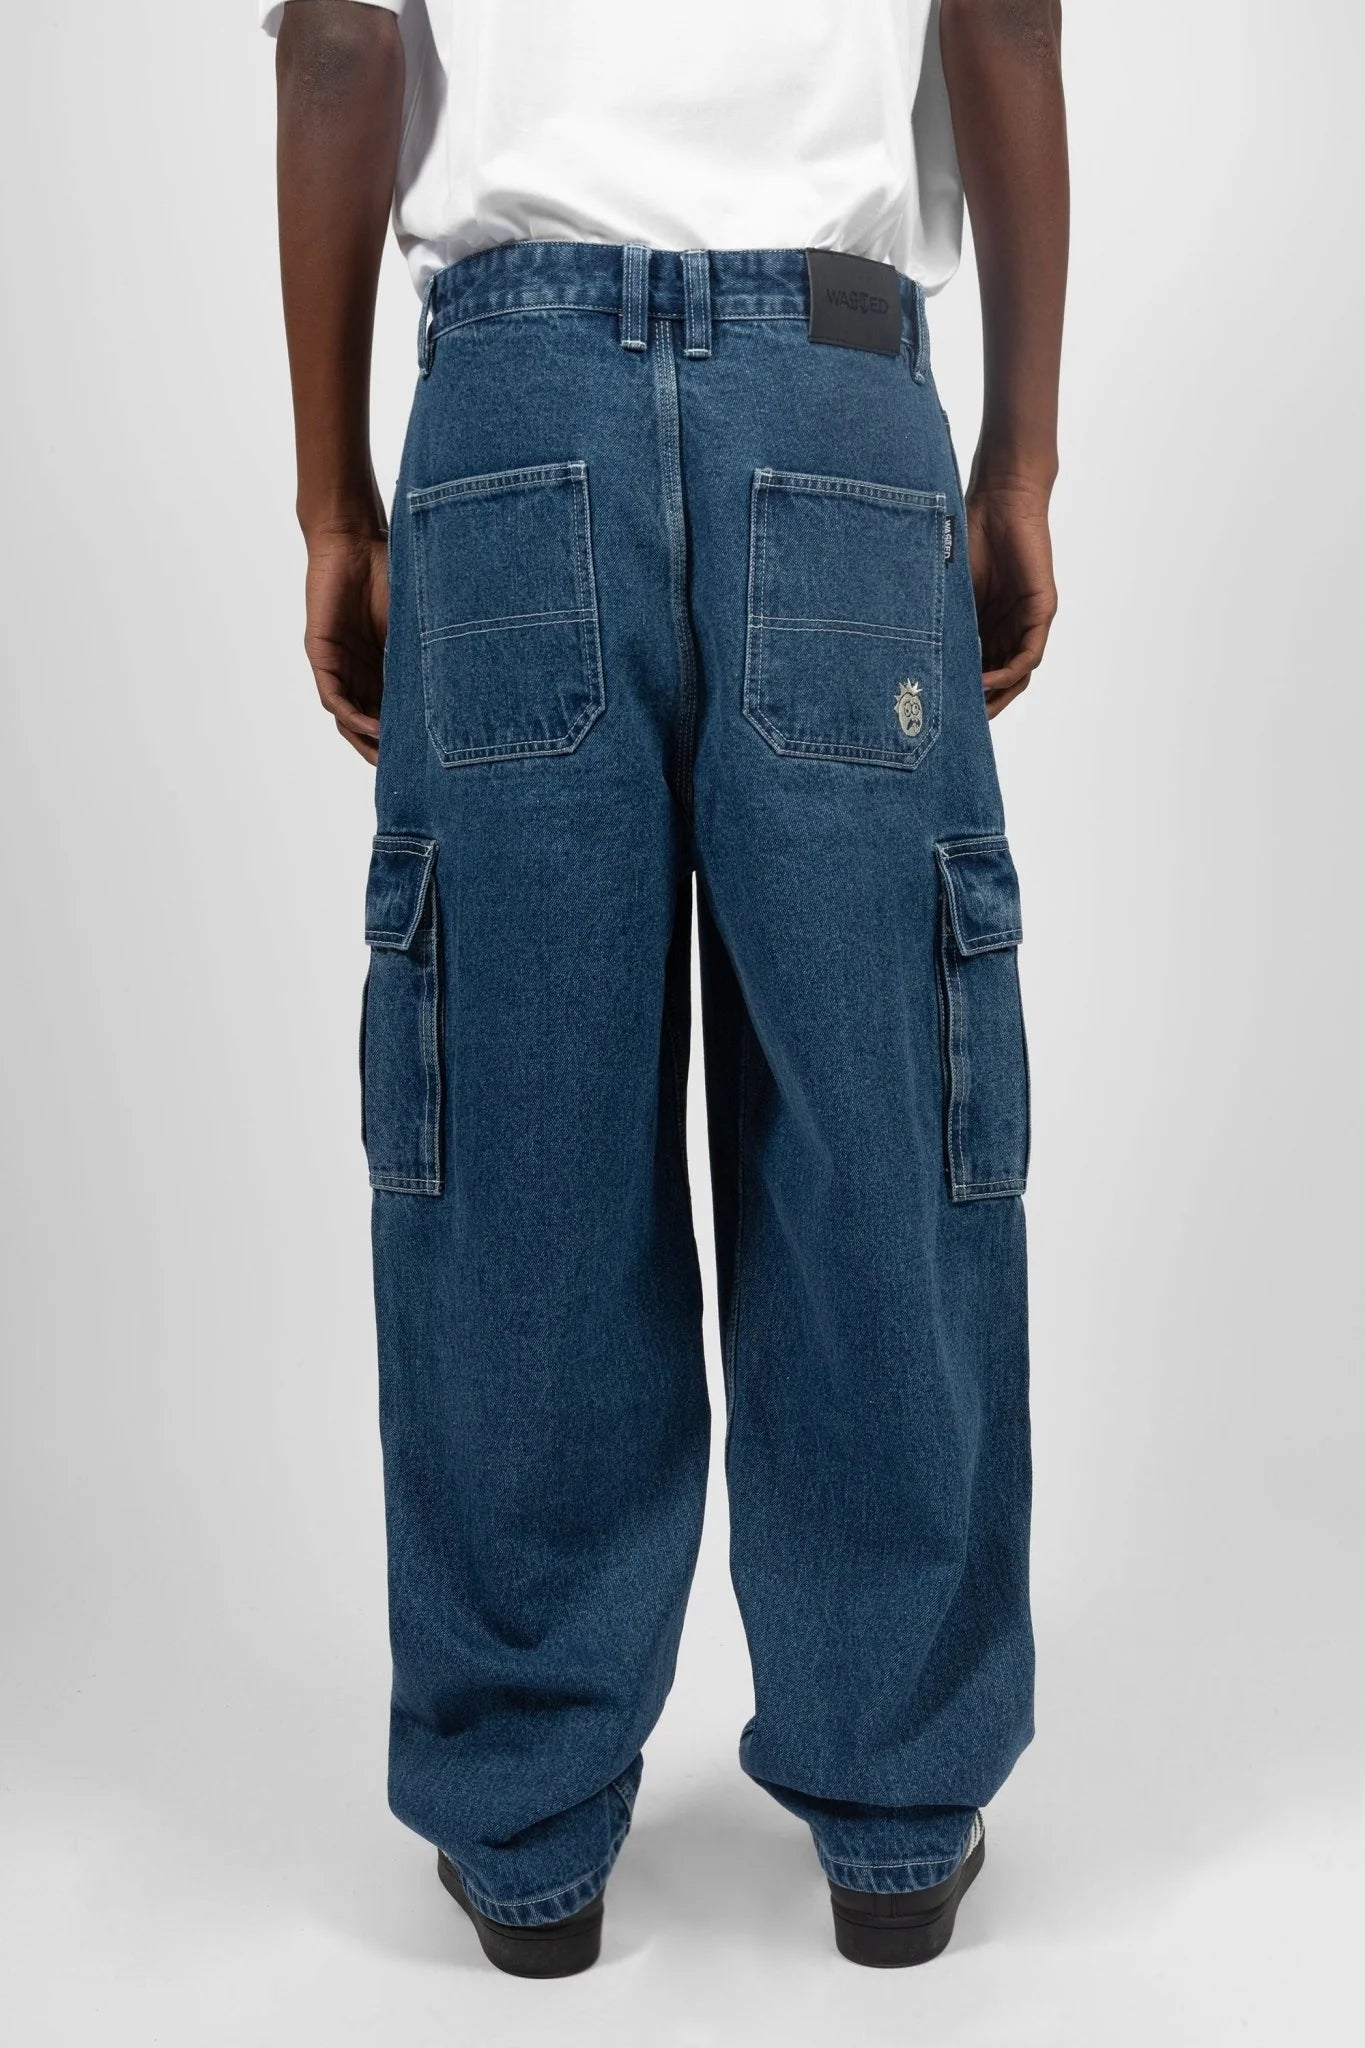 WASTED PARIS - CREAGER PANT - WASHED BLUE